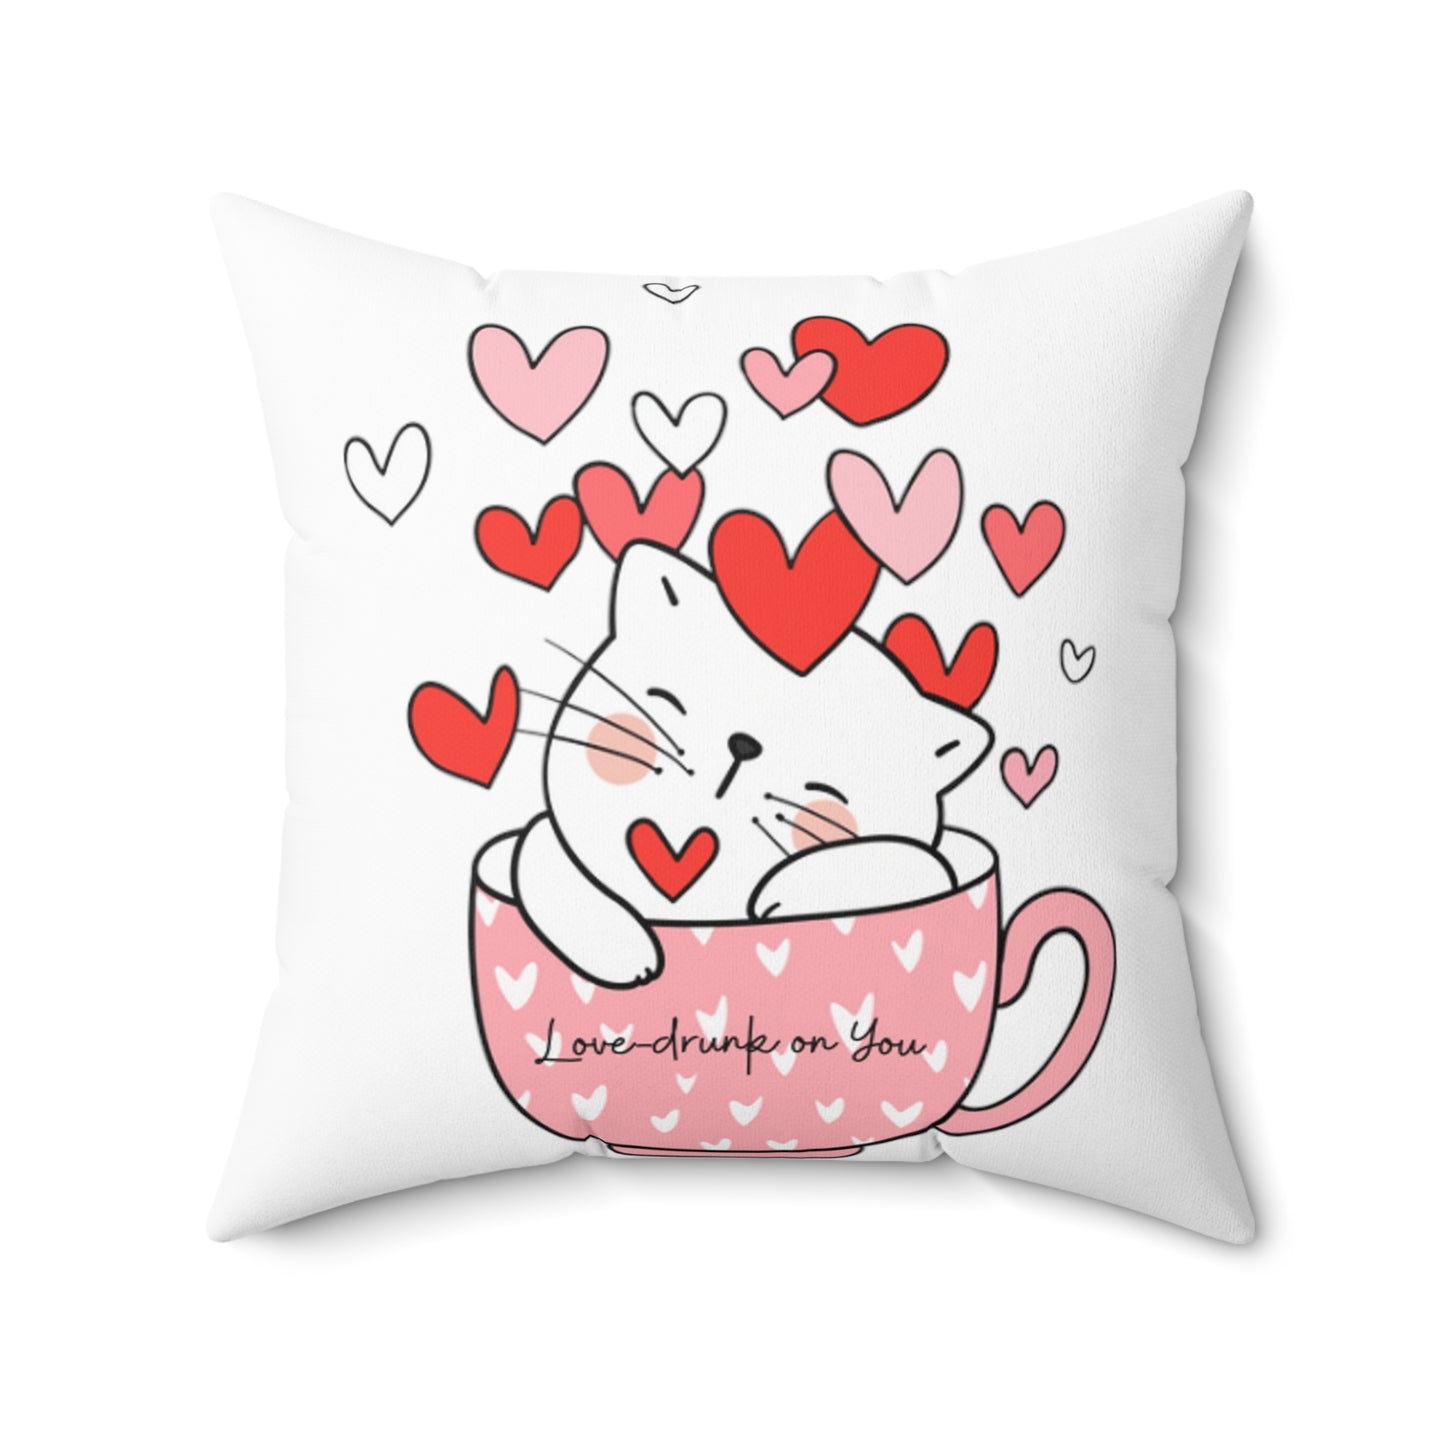 Love-drunk on You Valentines Day Gift Kitty Cat Comfort Spun Polyester Square Pillow